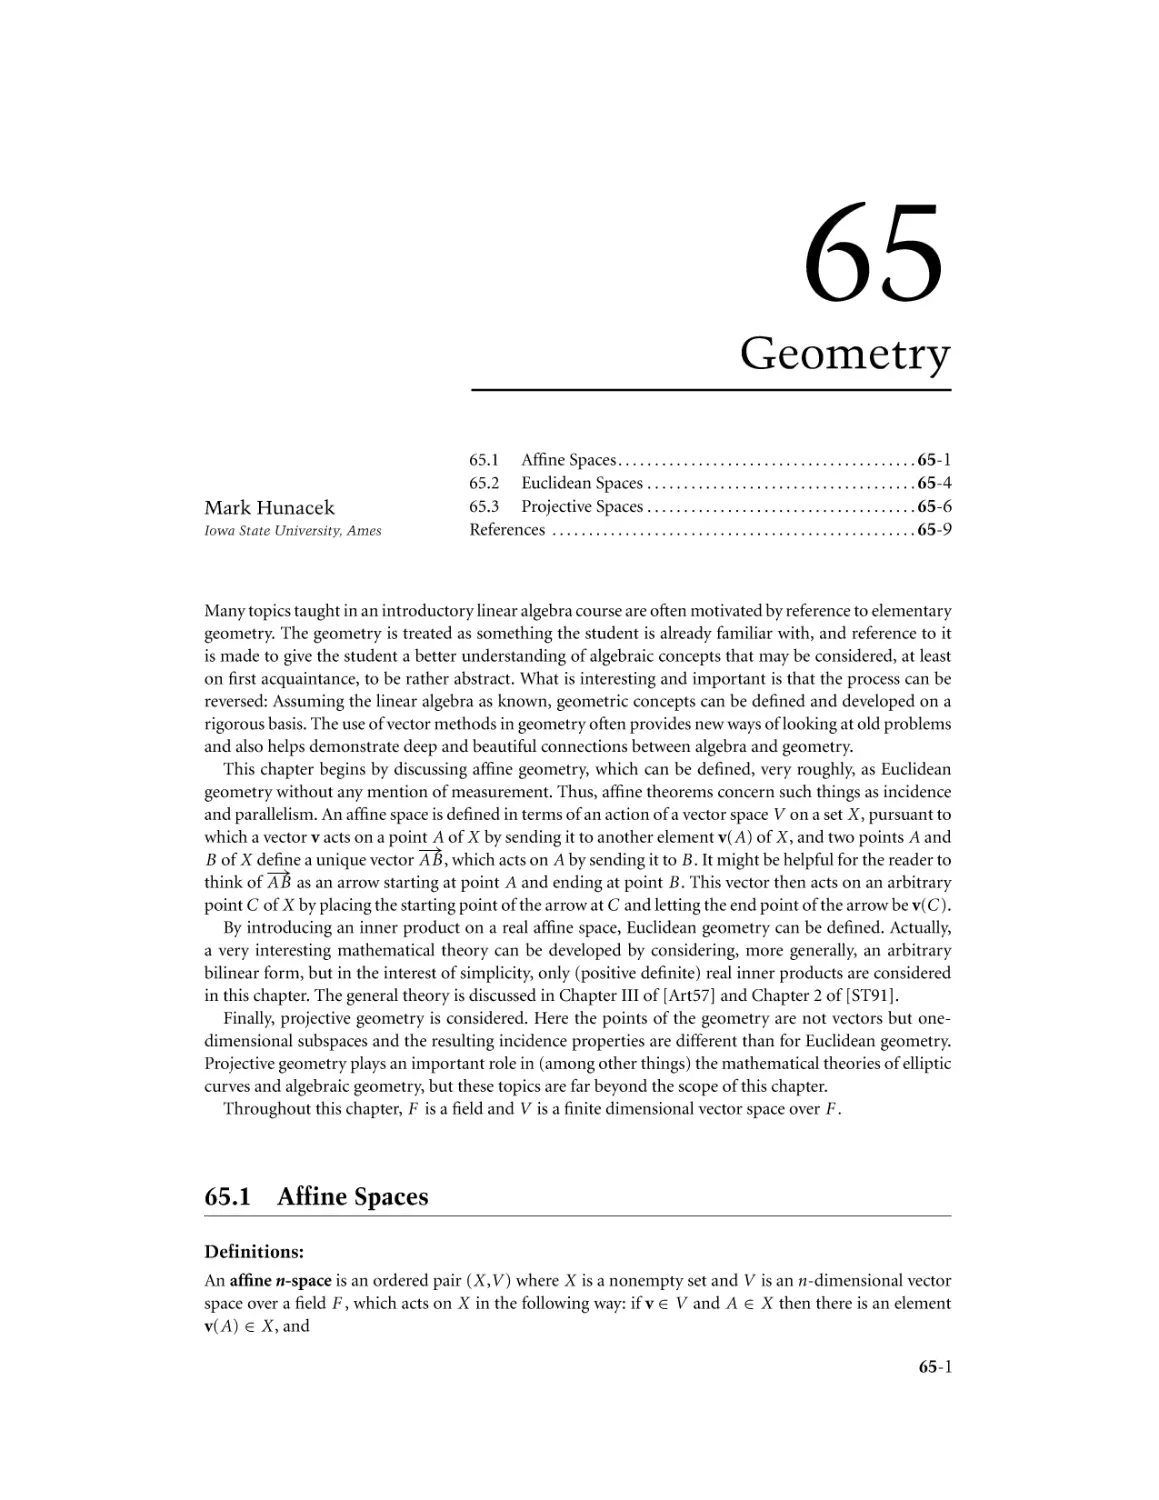 Chapter 65. Geometry